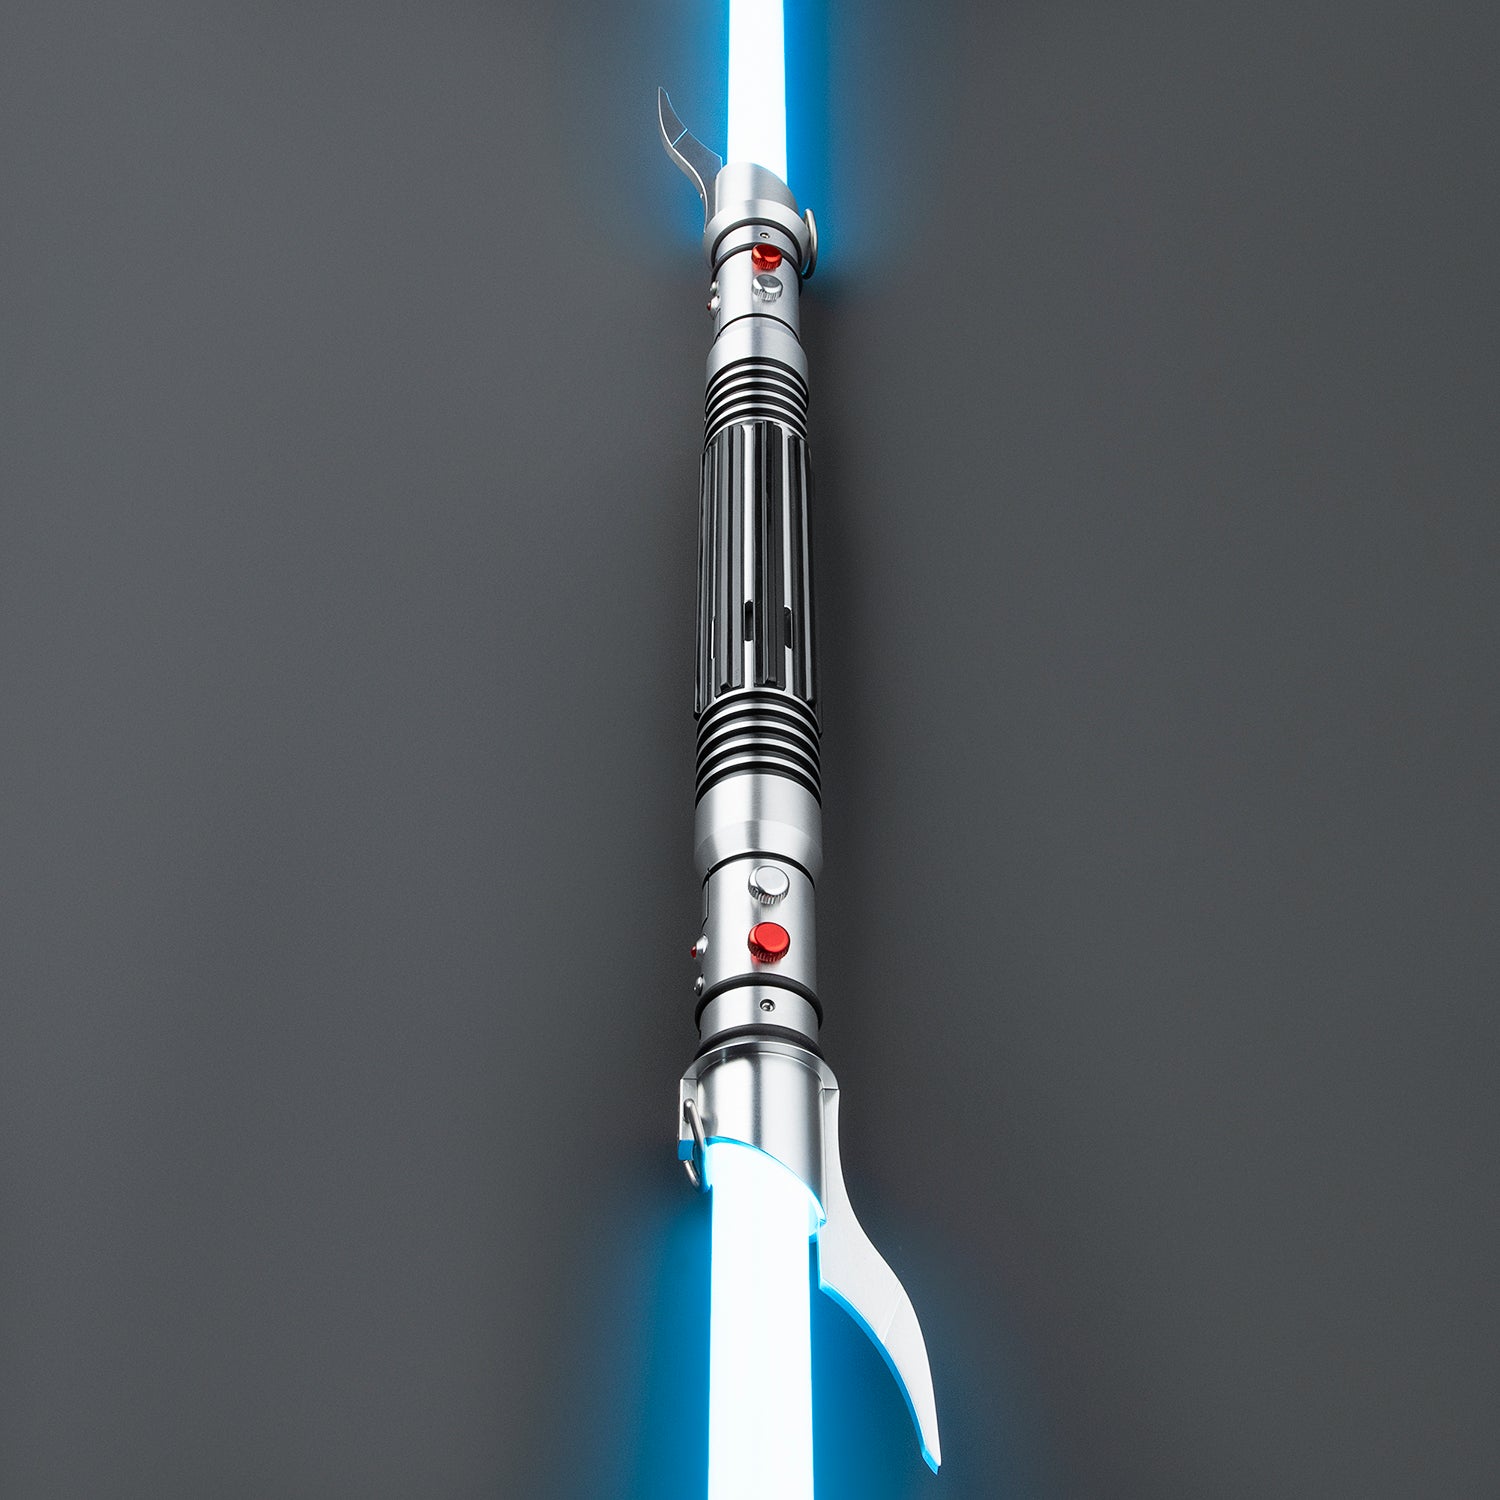 SaberCustom Double Blades Darth Maul Xenopixel v3 Lightsaber Collection and Display Infinite Colors Changing NO081